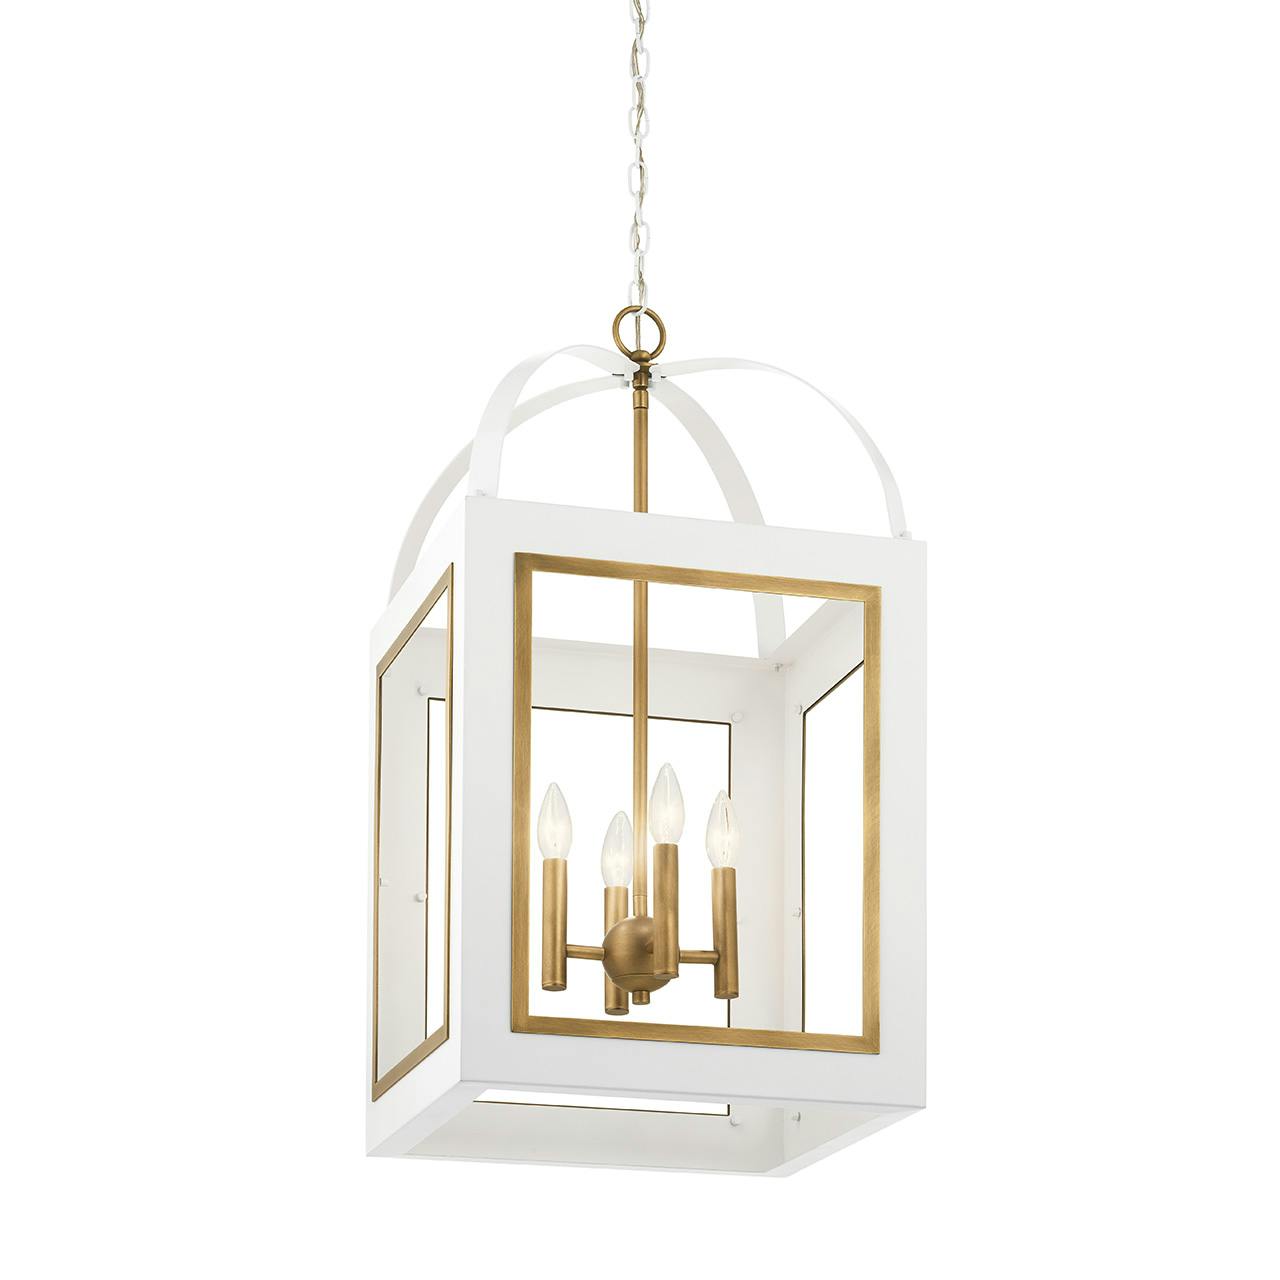 Vath 4 Light Foyer Pendant White & Brass without the canopy on a white background